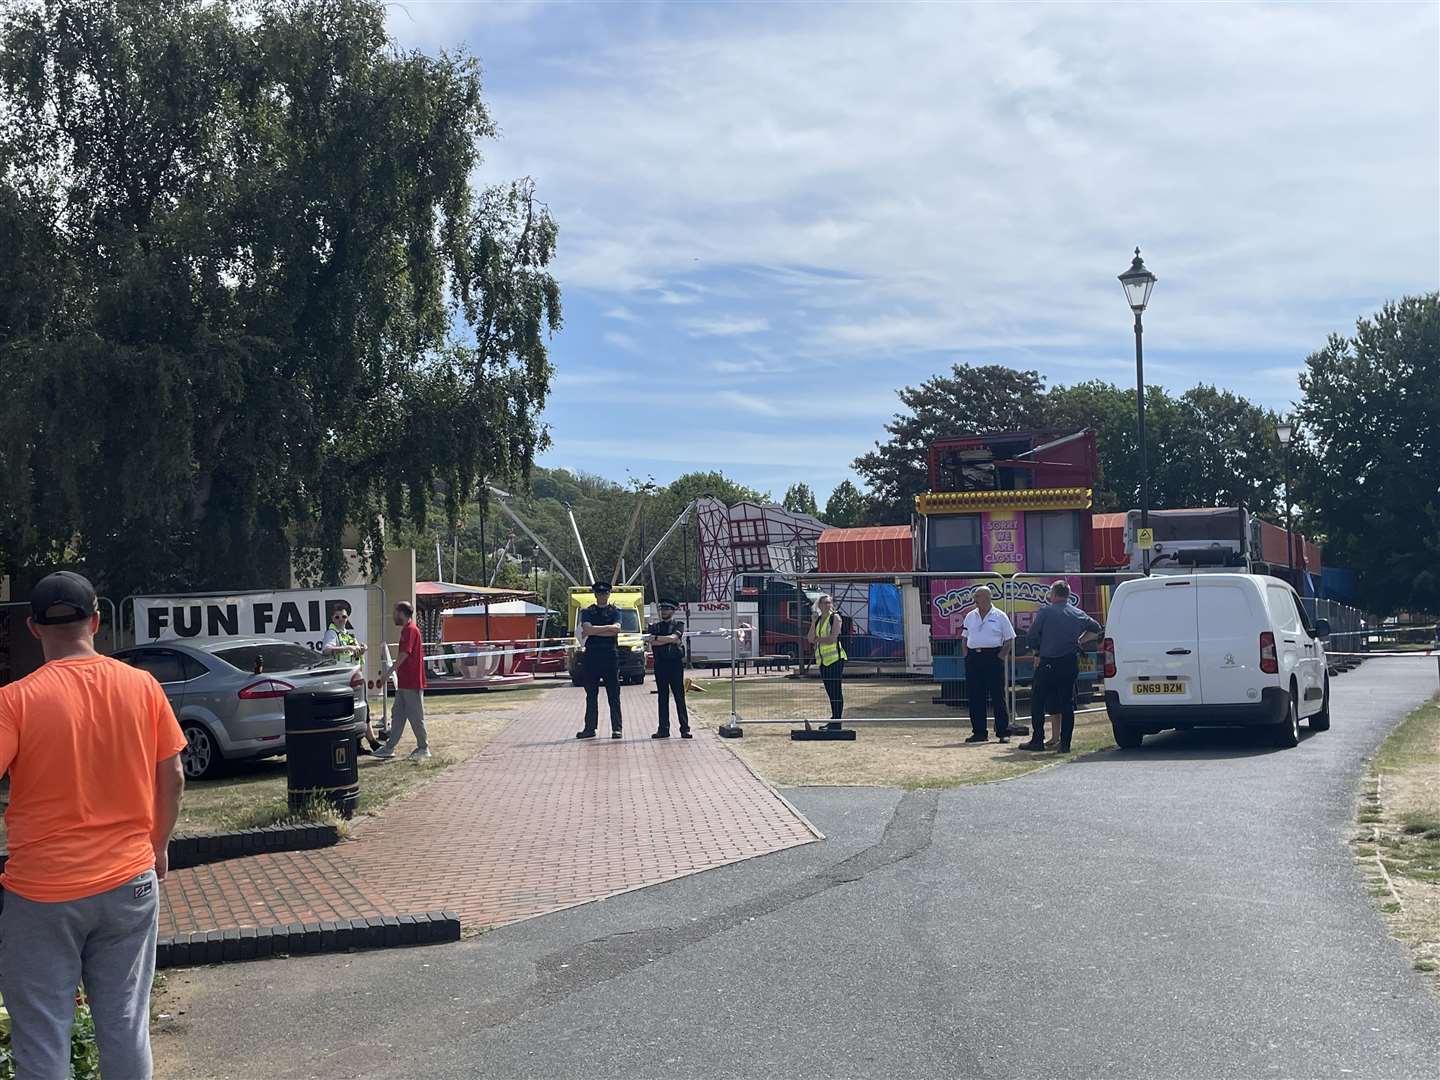 The fun fair in Pencester Gardens was cordoned off by police